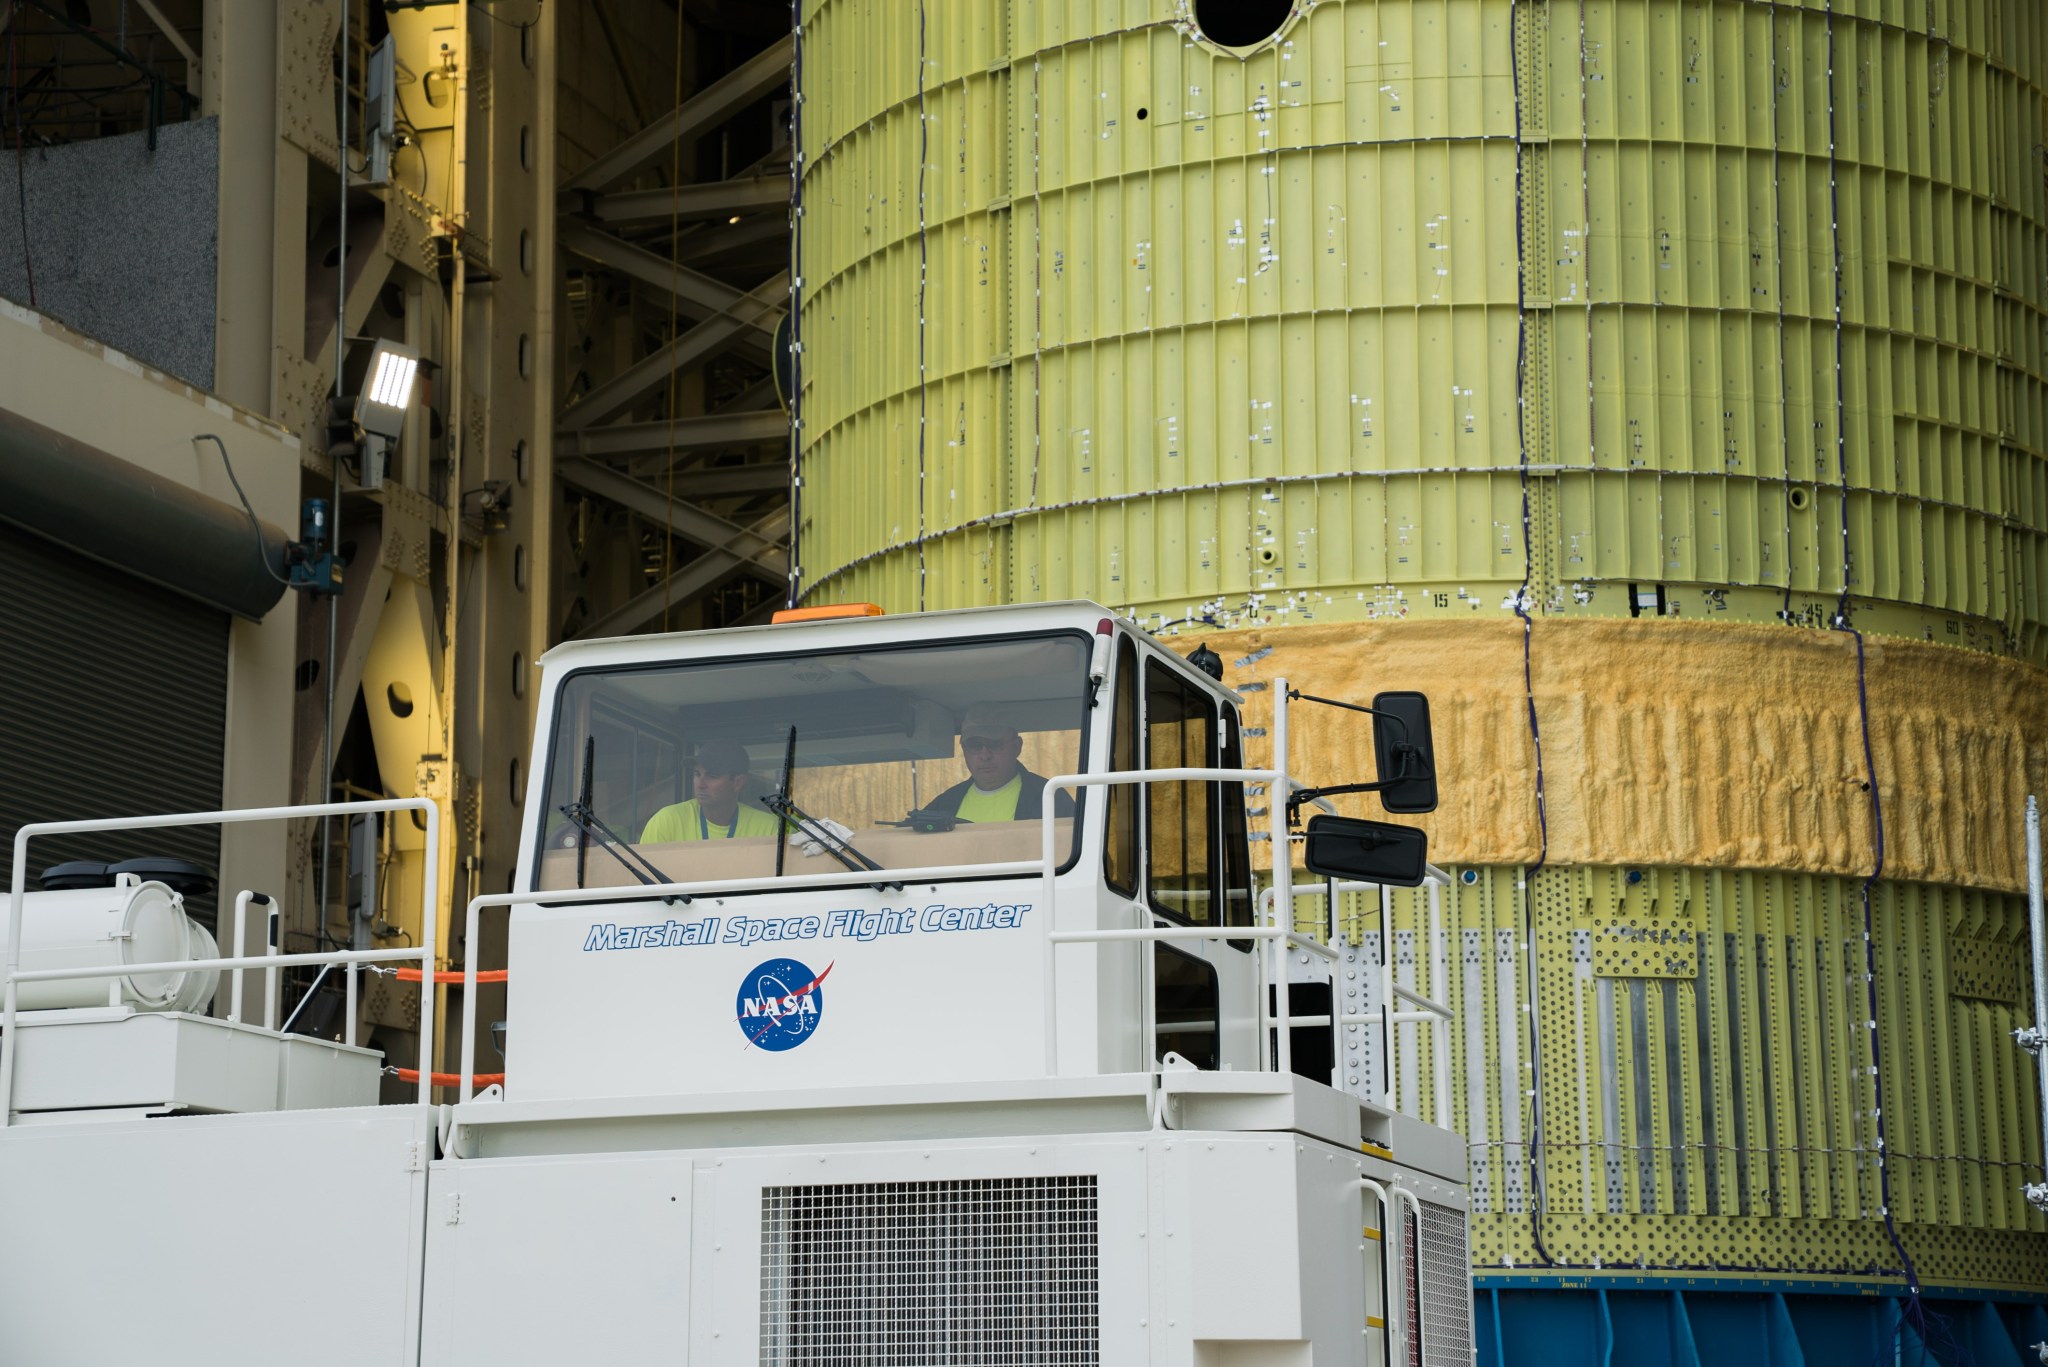 Using a specialized truck, structural test hardware for NASA's Space Launch System is moved.